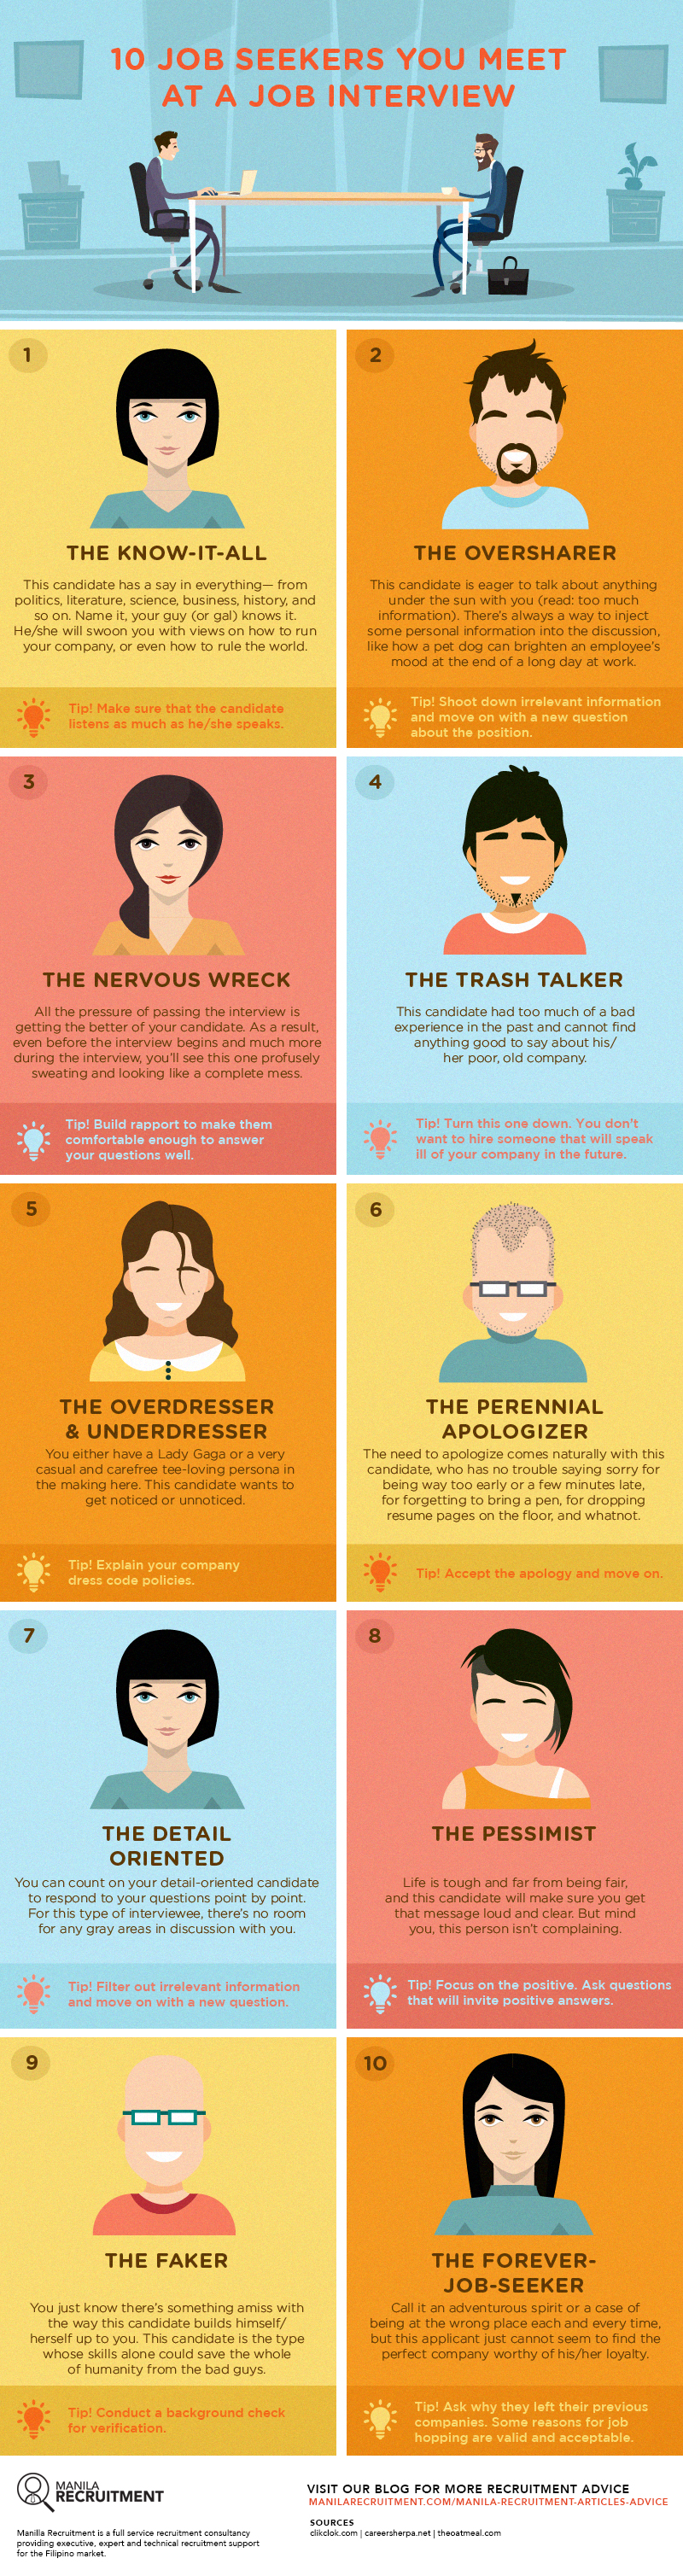 10 Job Seekers You Meet At a Job Interview | Infographic